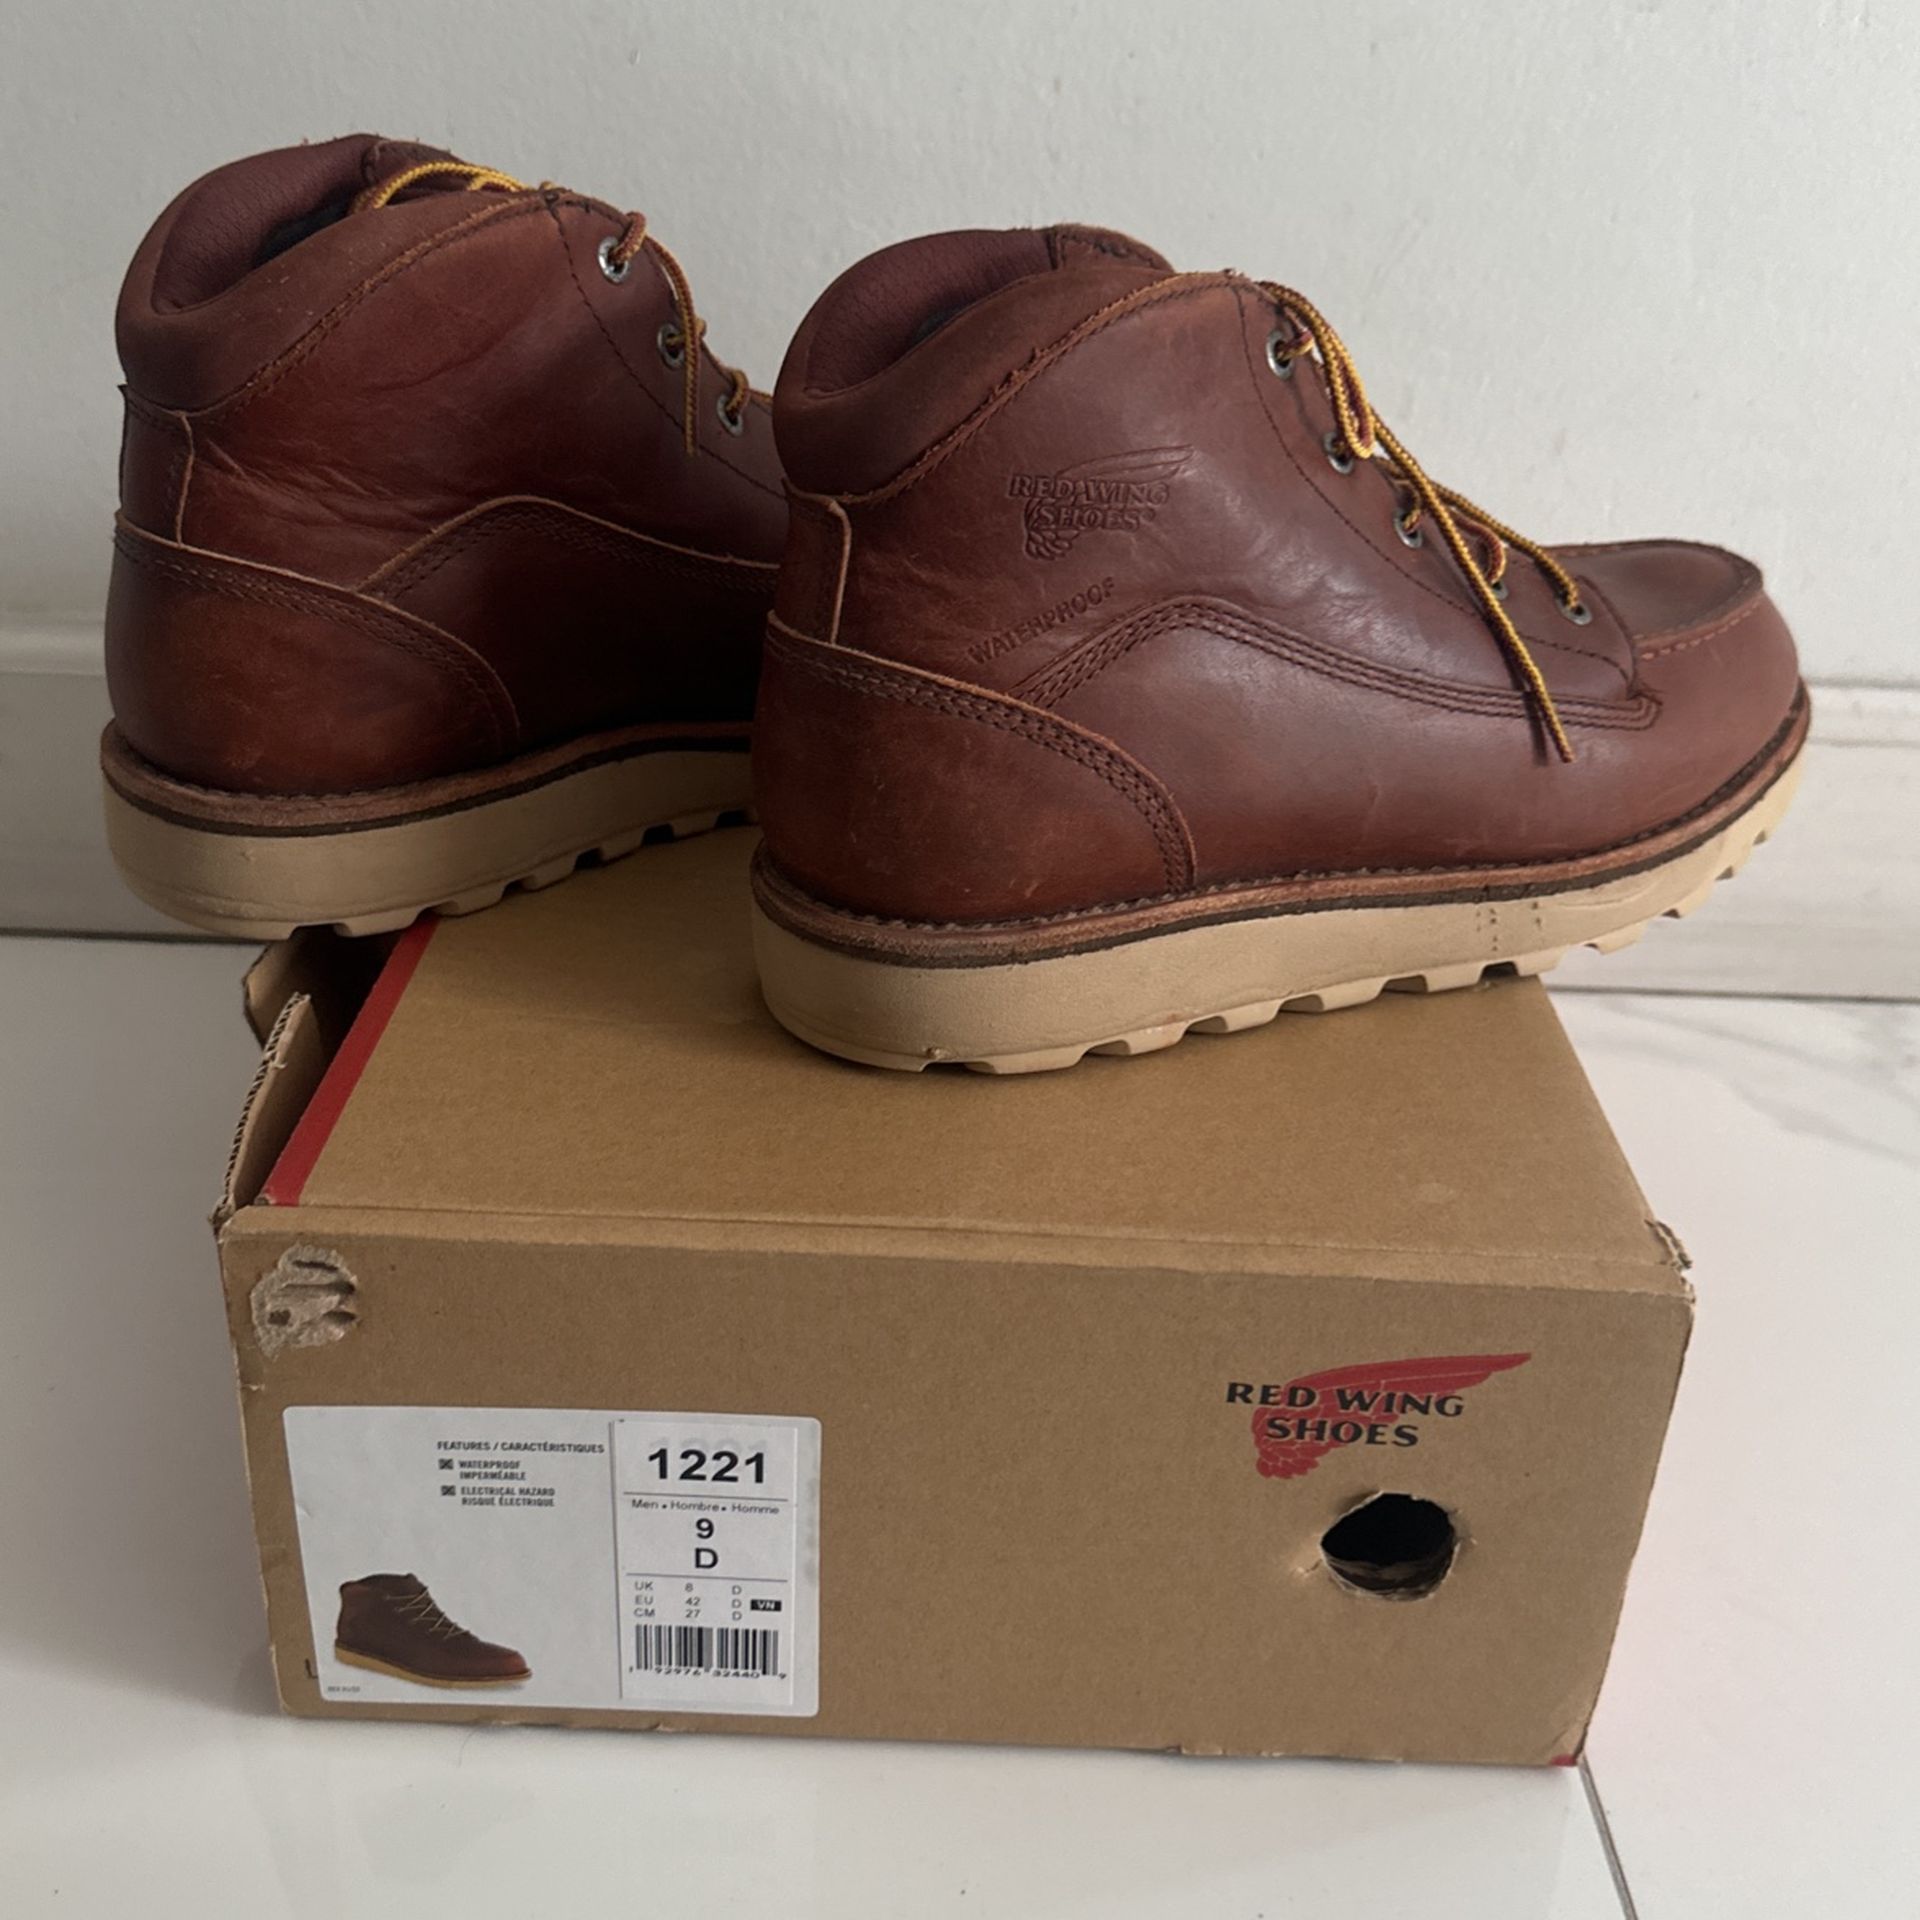 Red Wing Shoes , Style 1221, Sizes 9D , Soft Shoes,Waterproof, EH, Oil/slip Resistant.